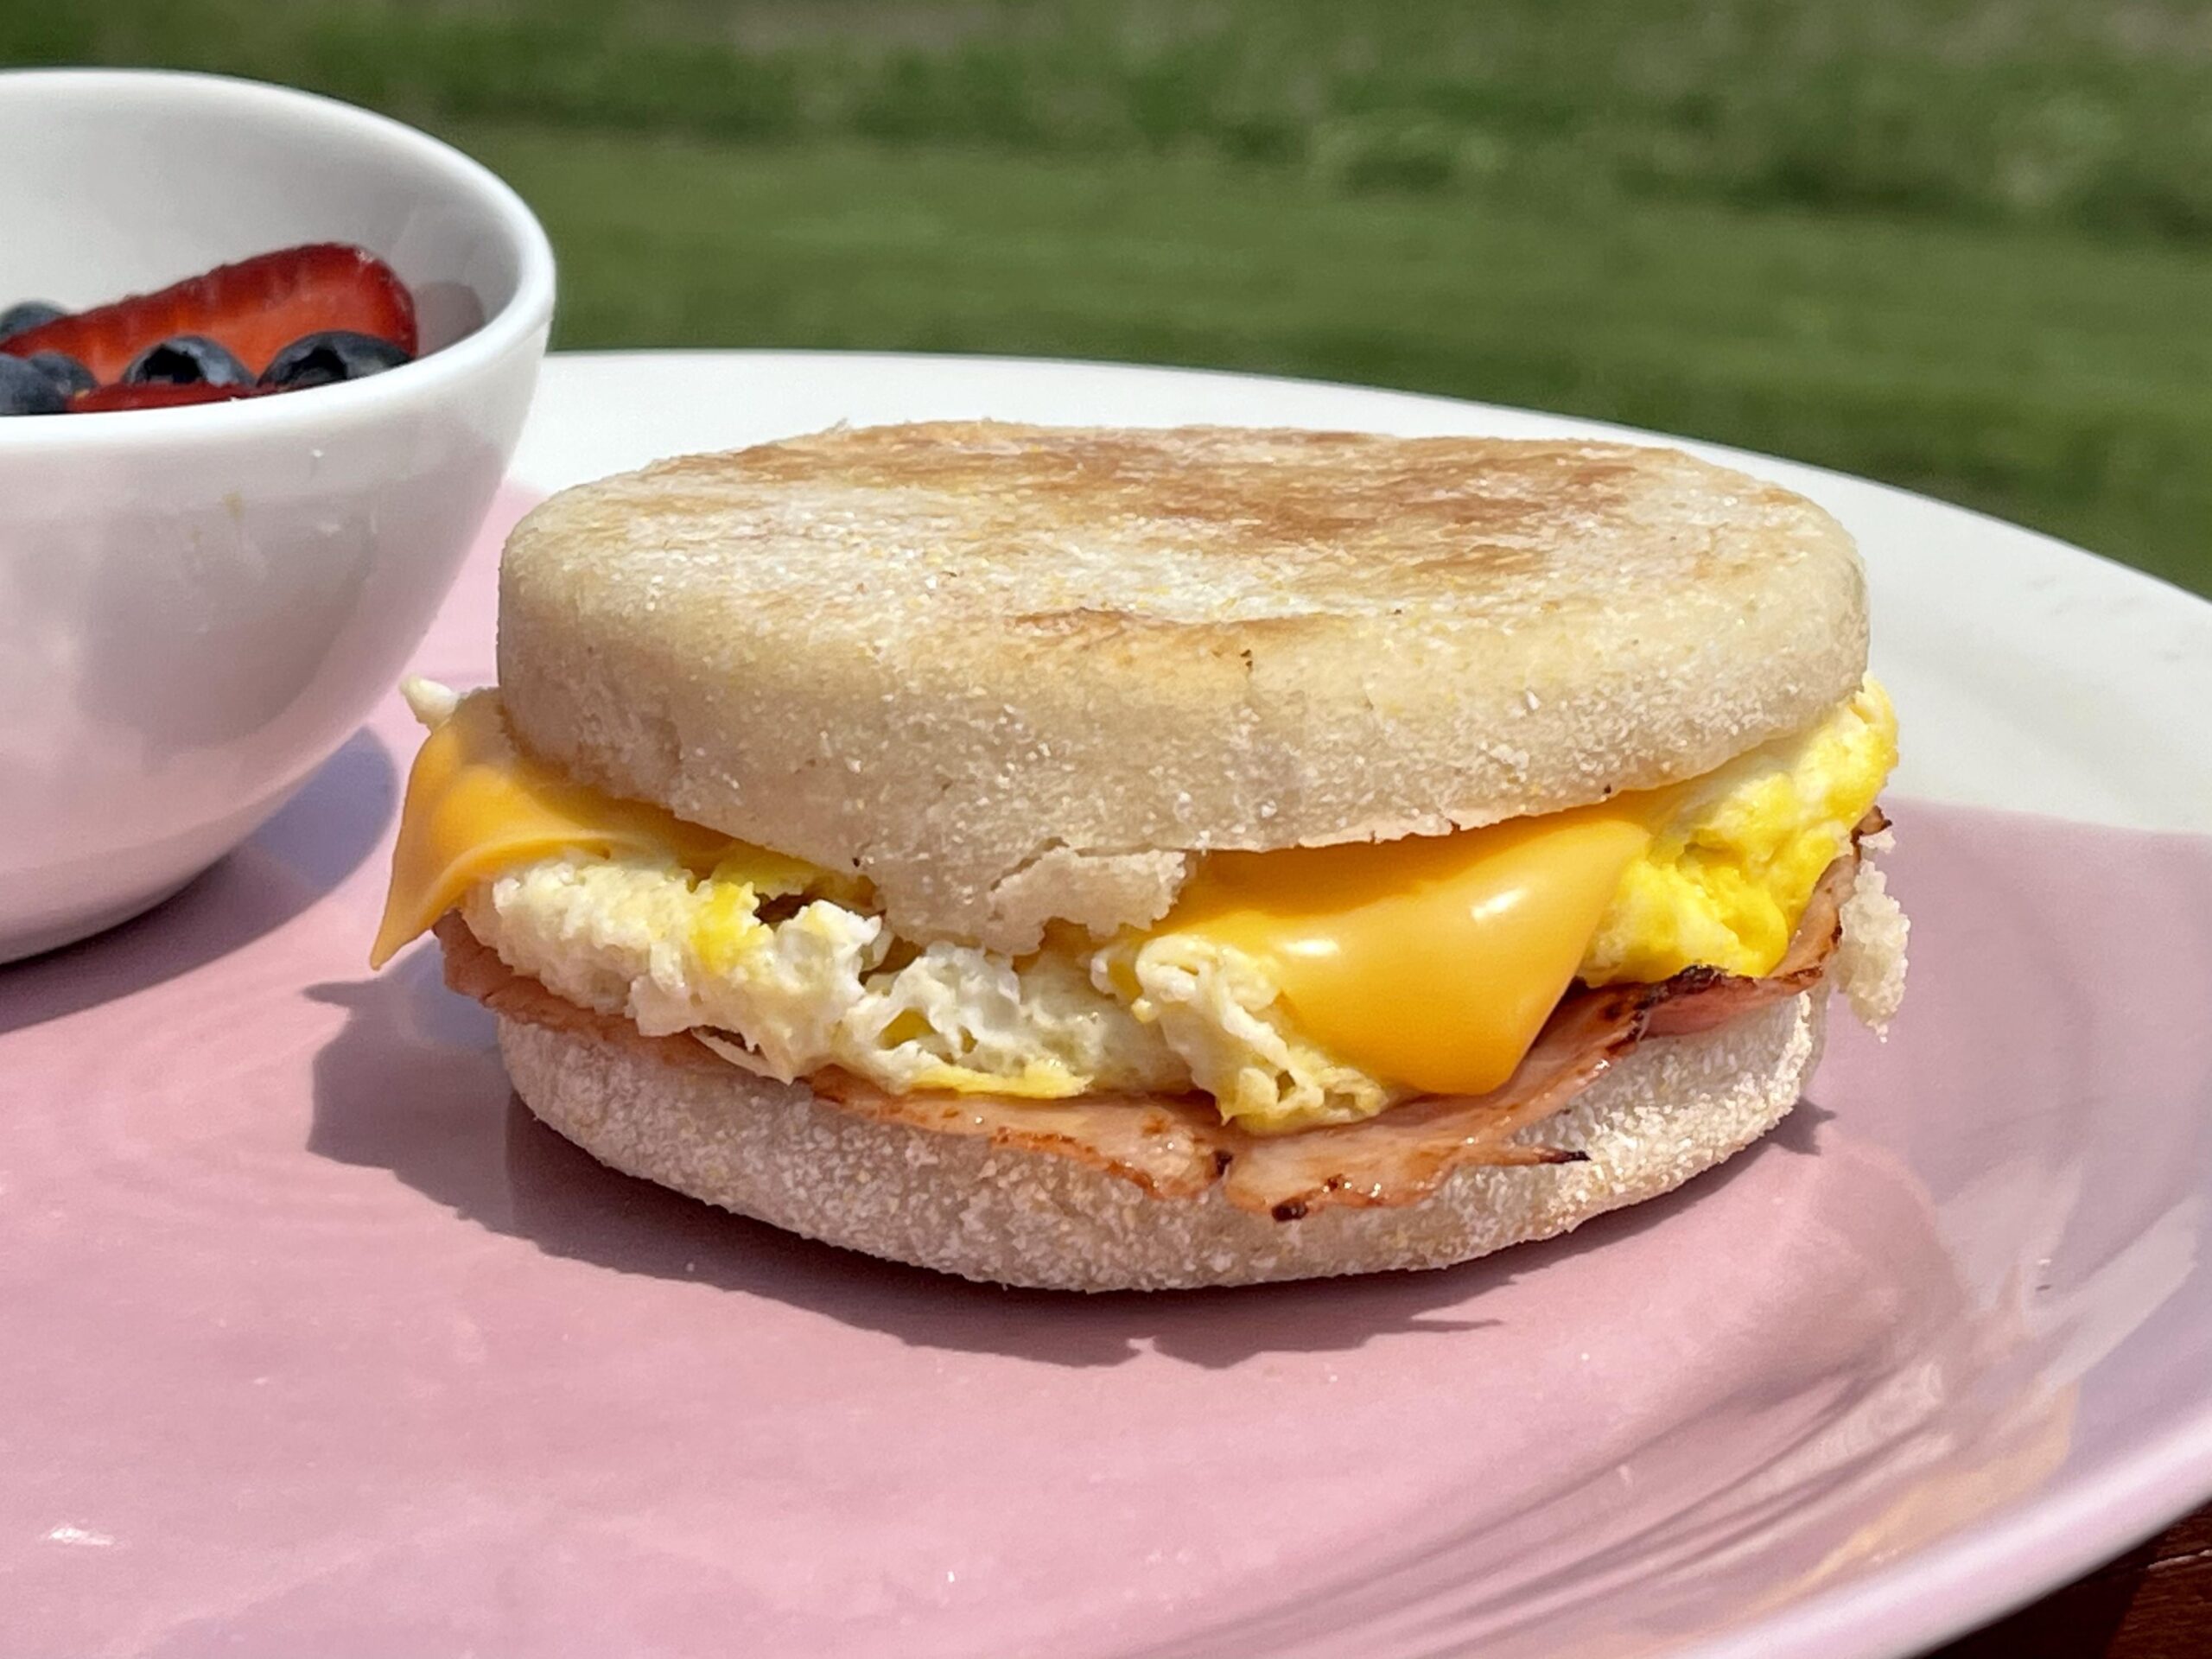  When English Muffins Met Ham, Eggs, and Cheese